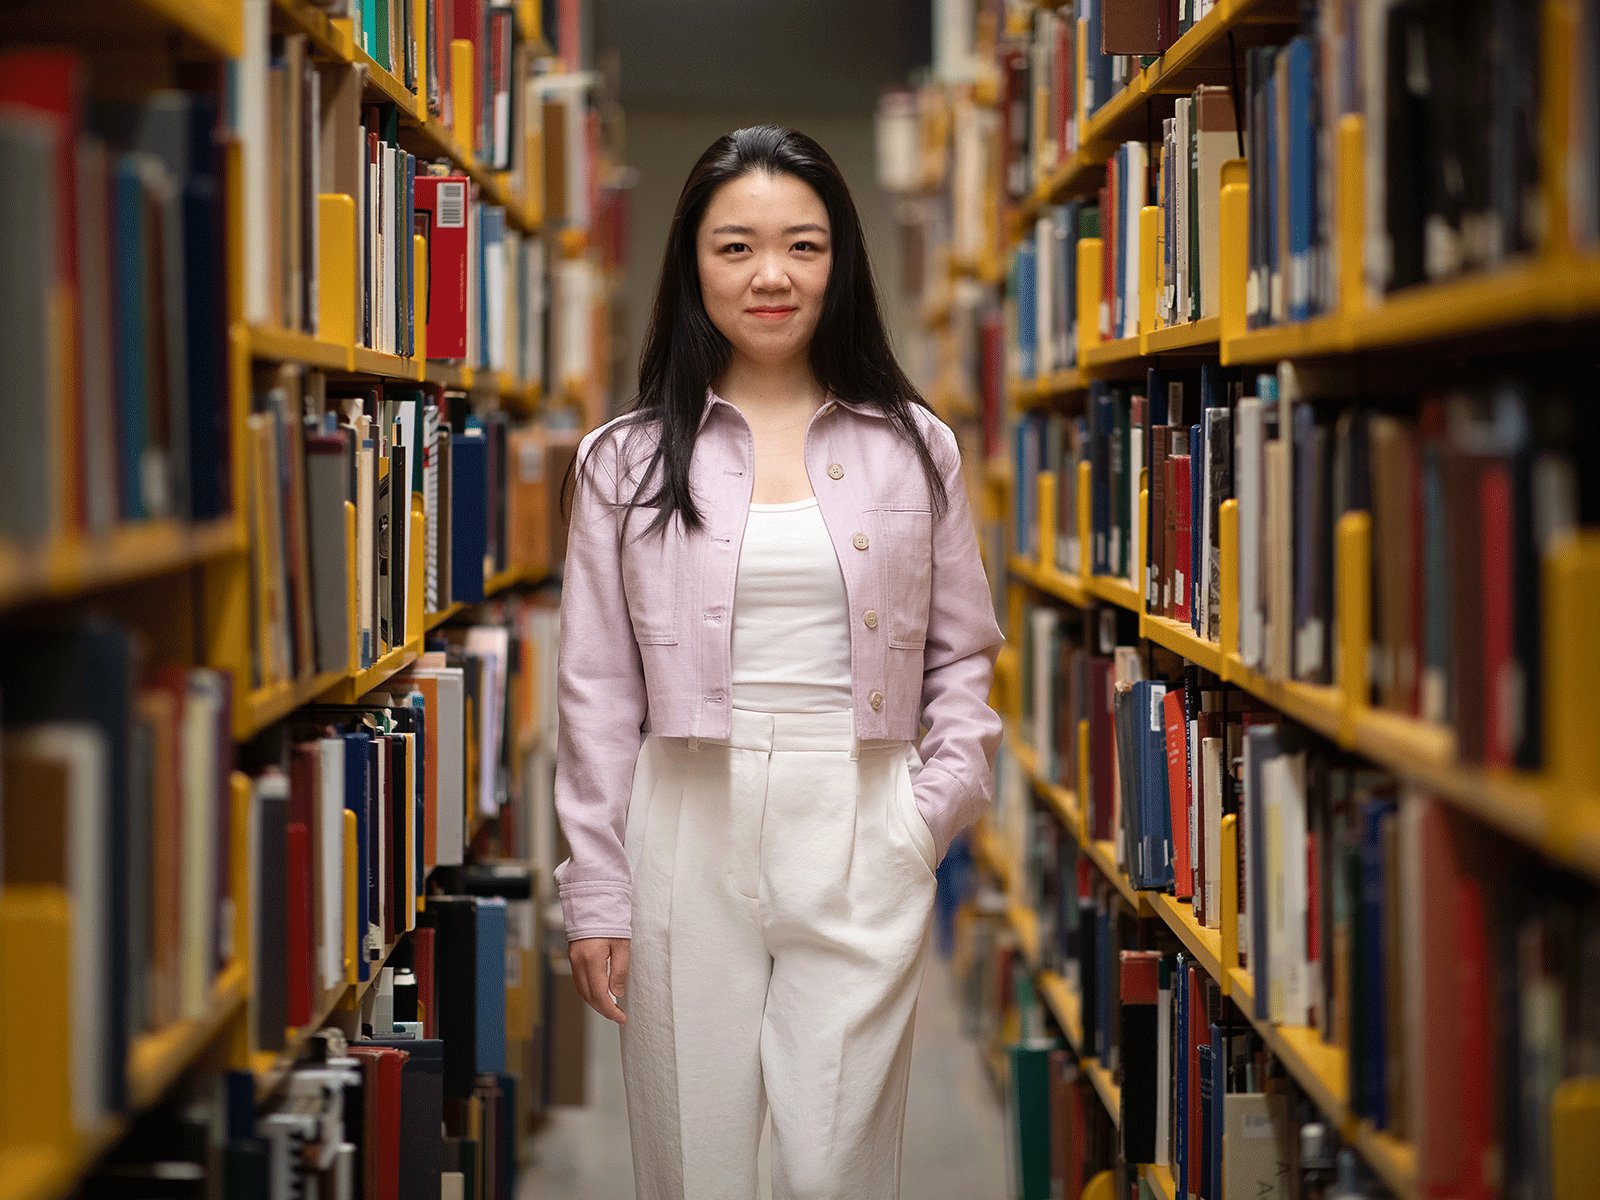 Professional photo of Yanfei Lu standing between two book shelves in a library.